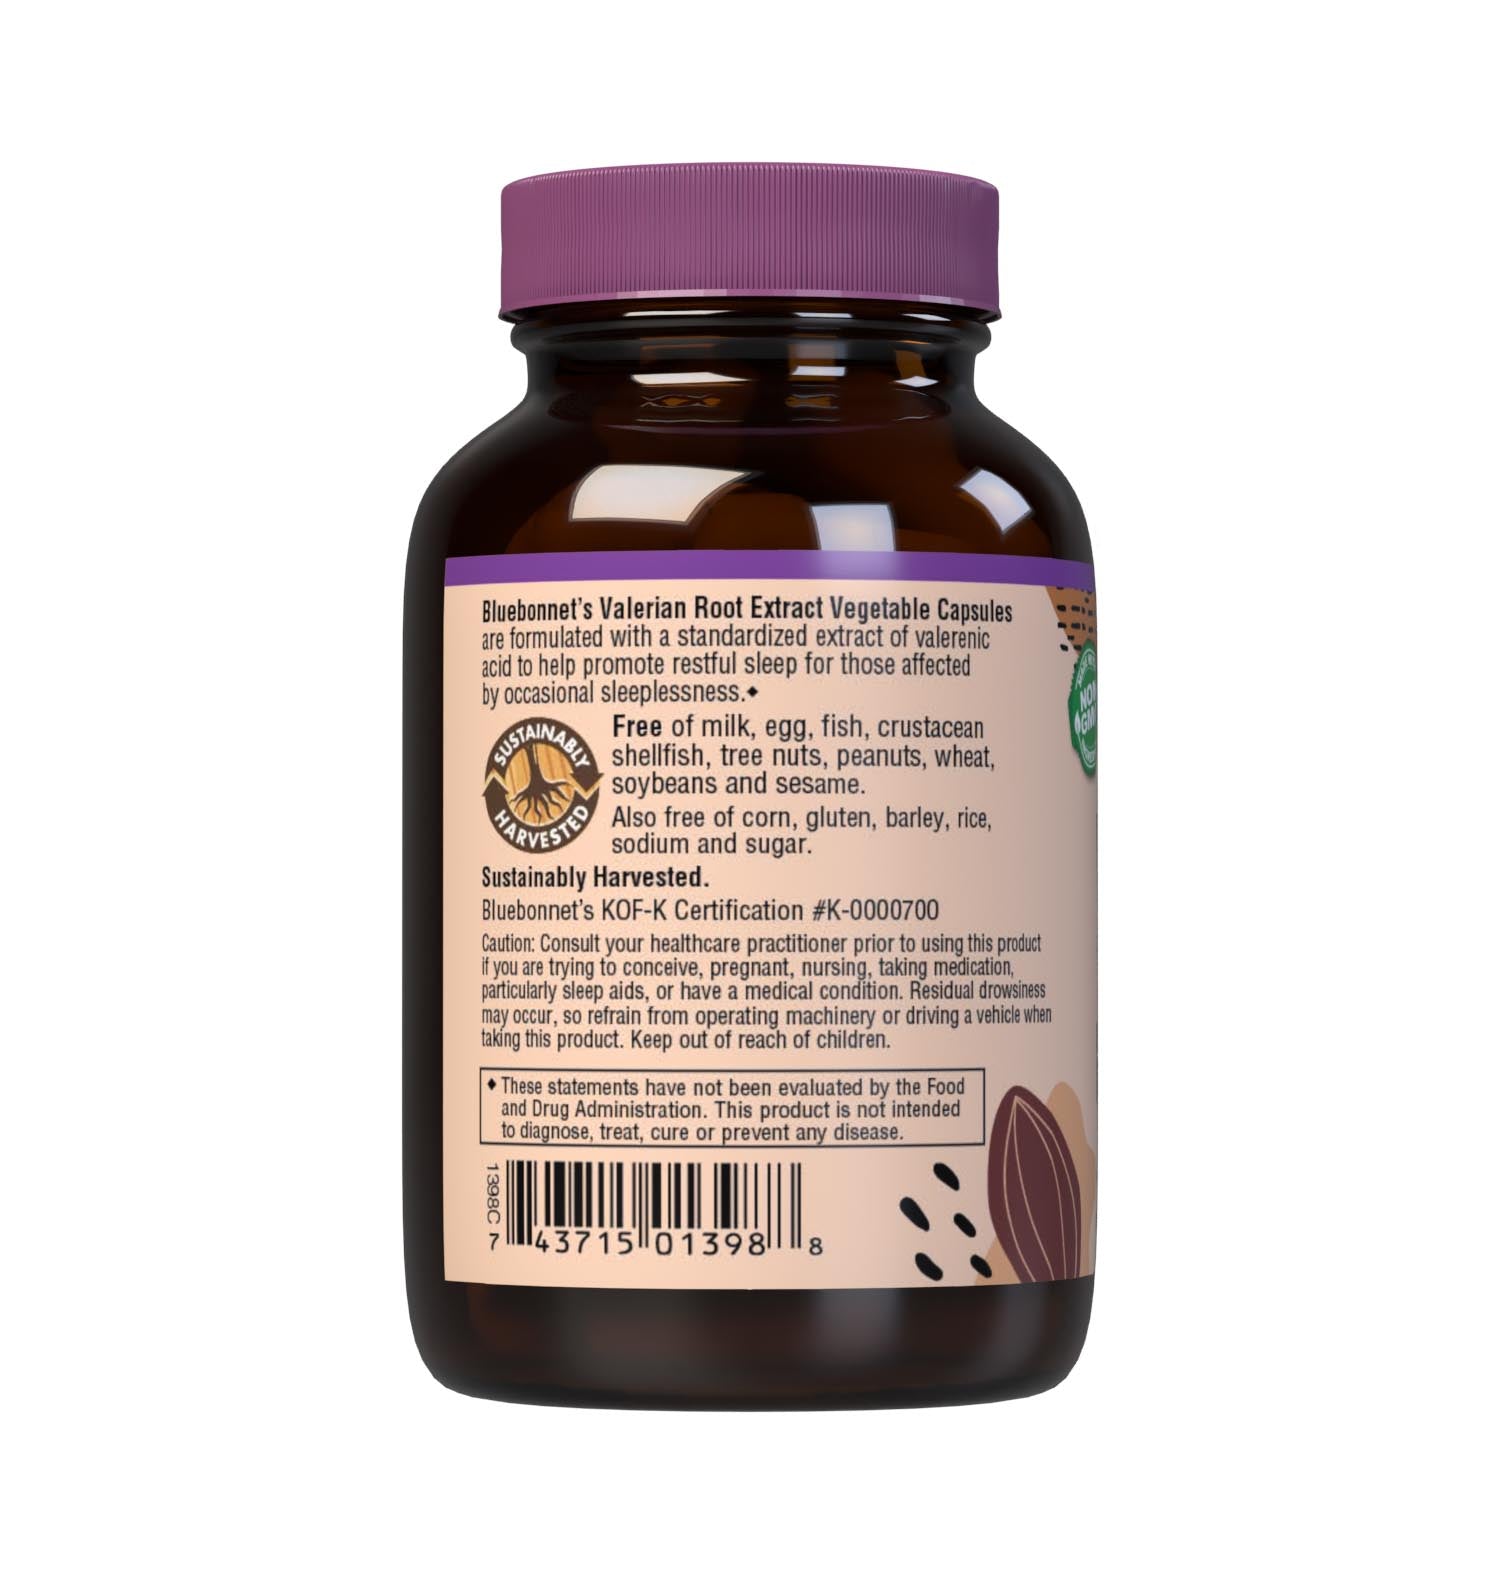 Bluebonnet’s Valerian Root Extract 60 Vegetable Capsules contain a standardized extract of total valerenic acid, the most researched active constituent found in valerian. A clean and gentle water-based extraction method is employed to capture and preserve valerian’s most valuable components. Description panel. #size_60 count